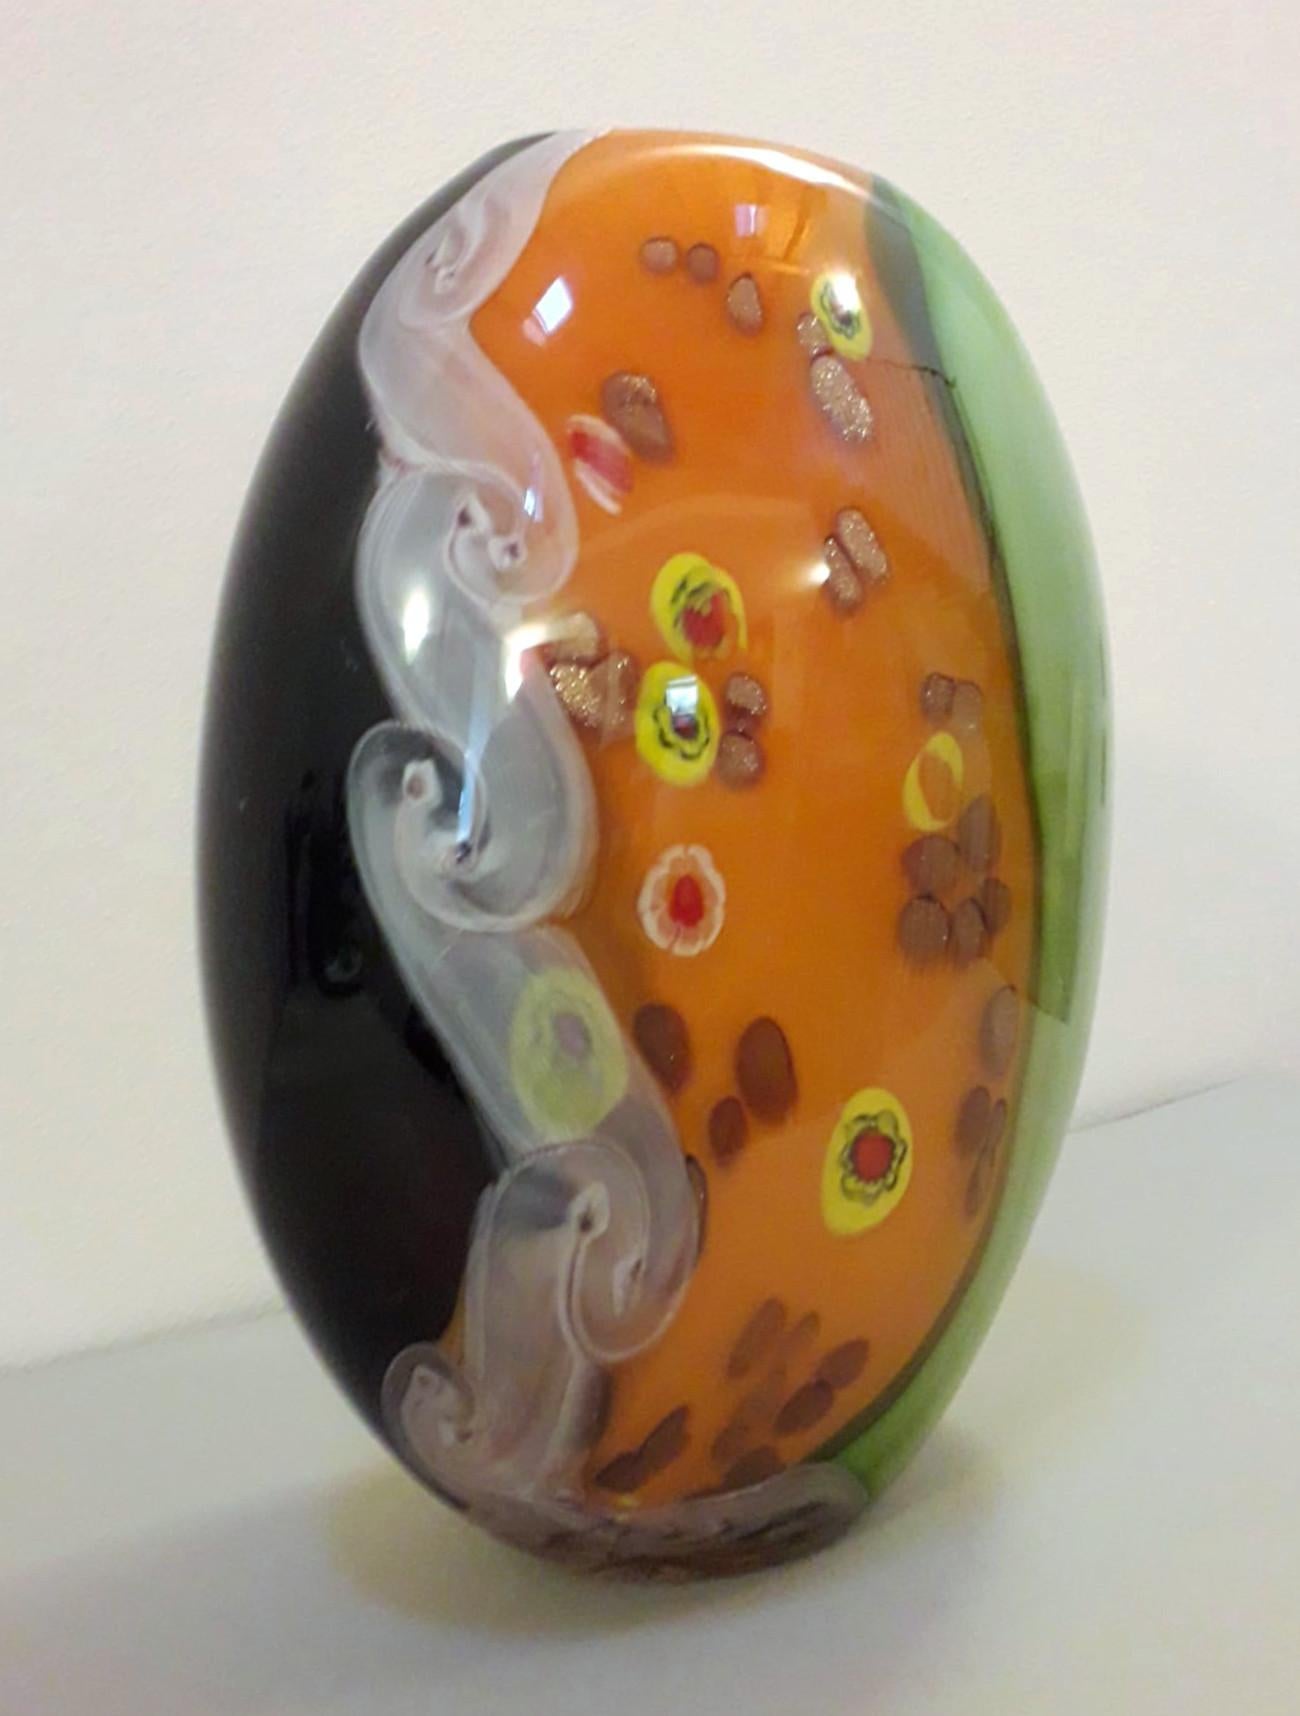 Vintage Italian Murano glass vase with green, orange, white and black color infused with Murrine / Made in Italy by Effe Due, circa 1970s
Original label and mark on the glass
Measures: Height 14 inches, diameter 11 inches
1 in stock in Italy ON 20%